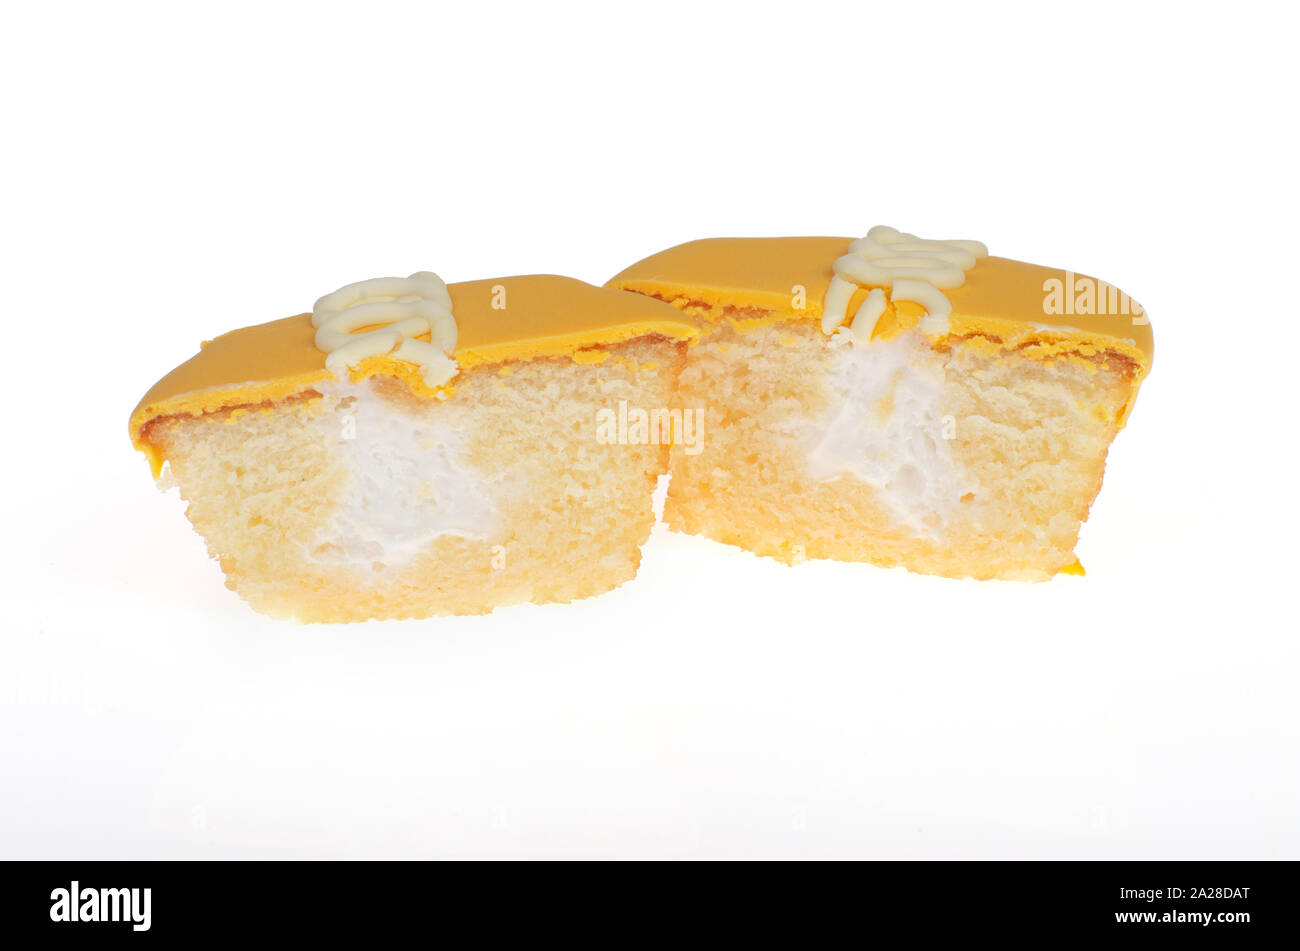 Hostess orange frosted cupcake cut in half showing creme filling Stock Photo